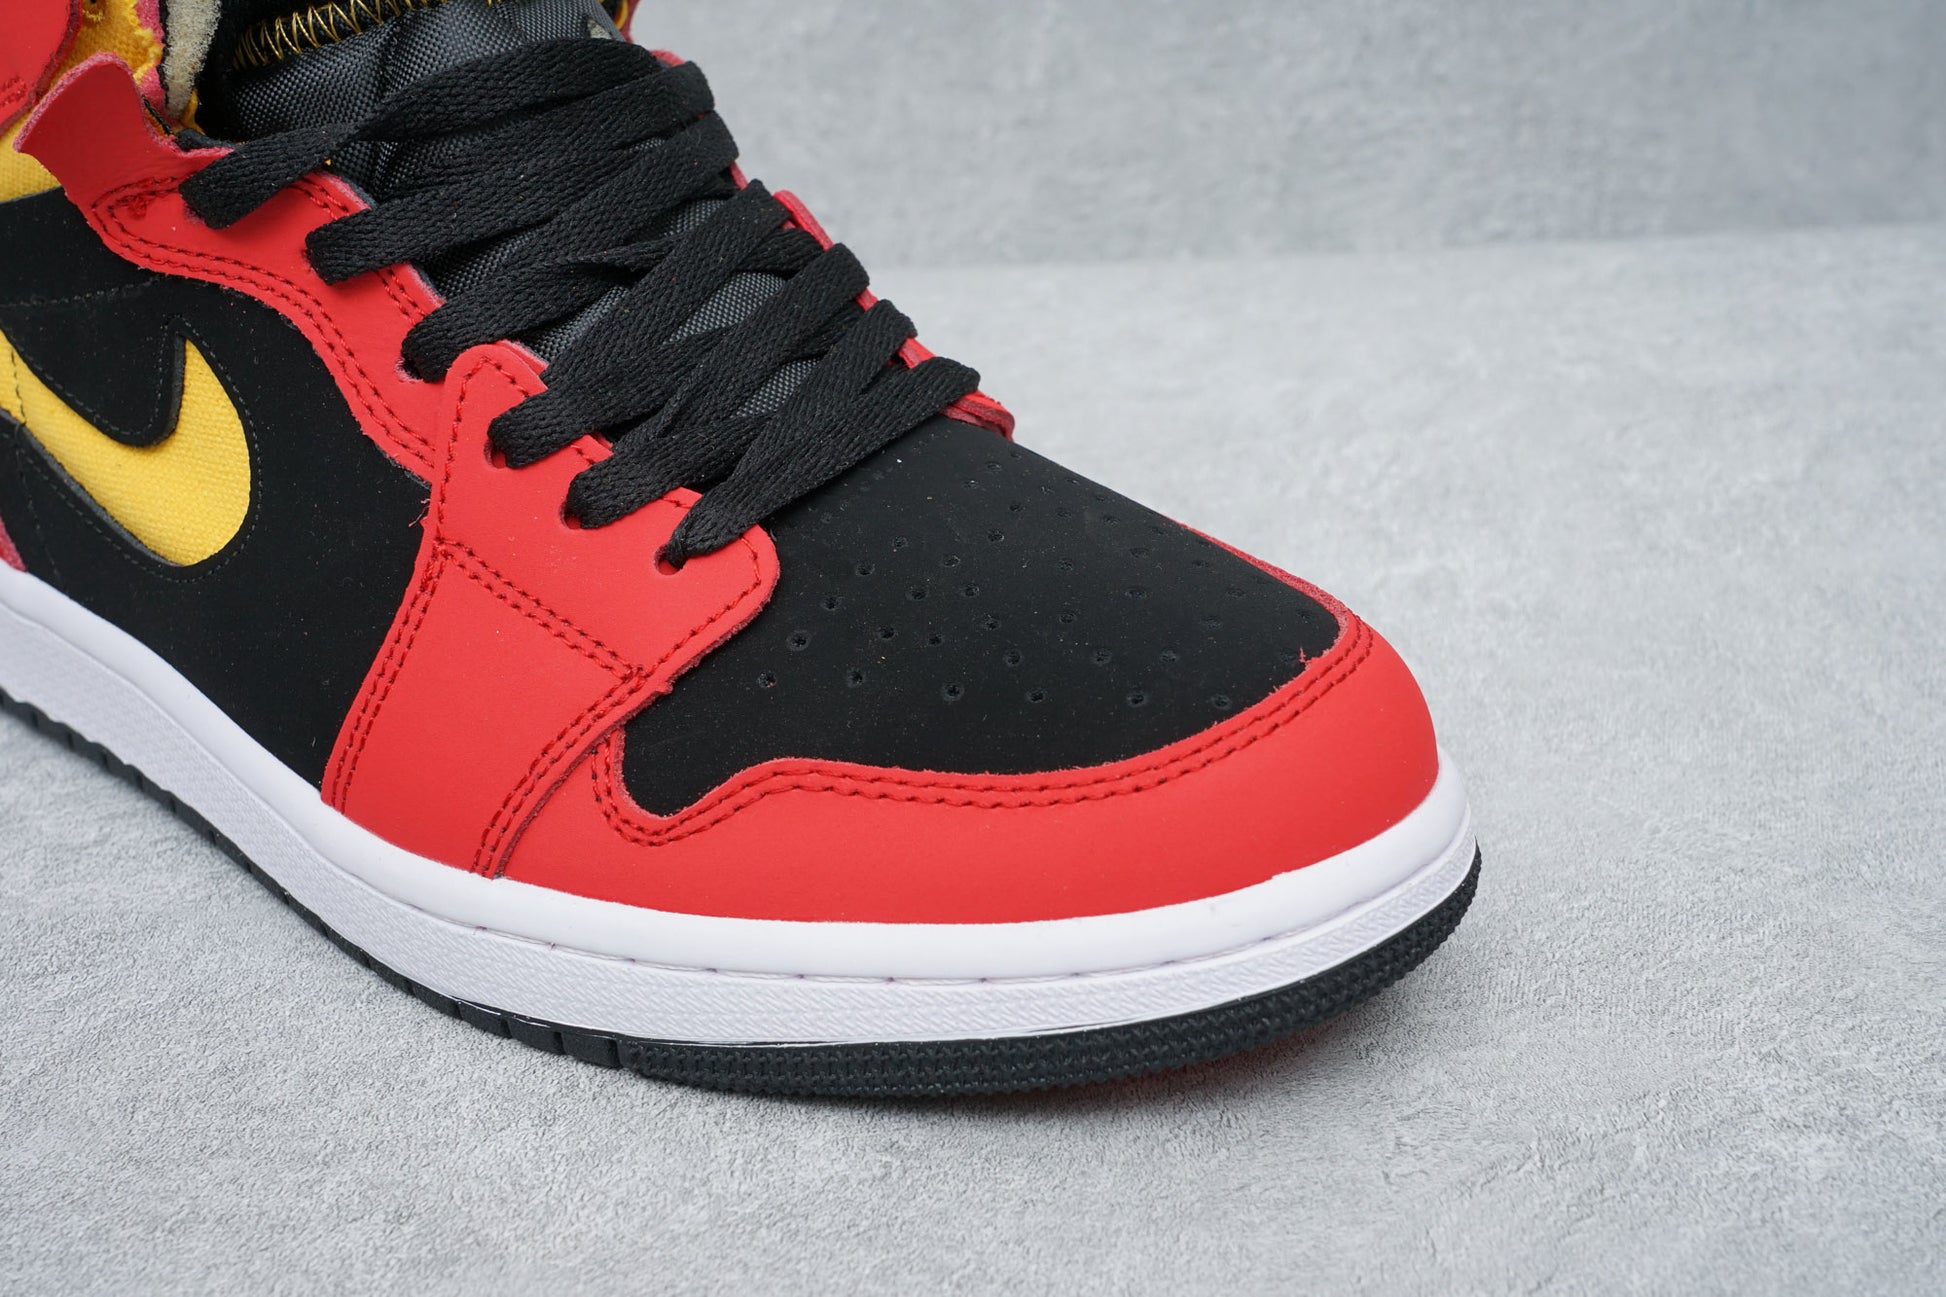 Iconic silhouette, Black Chile Red colorway, Comfortable design, Bold color combination, Premium materials, Zoom Air cushioning, Fashion-forward statement, Standout sneakers, Versatile style, All-day comfort.